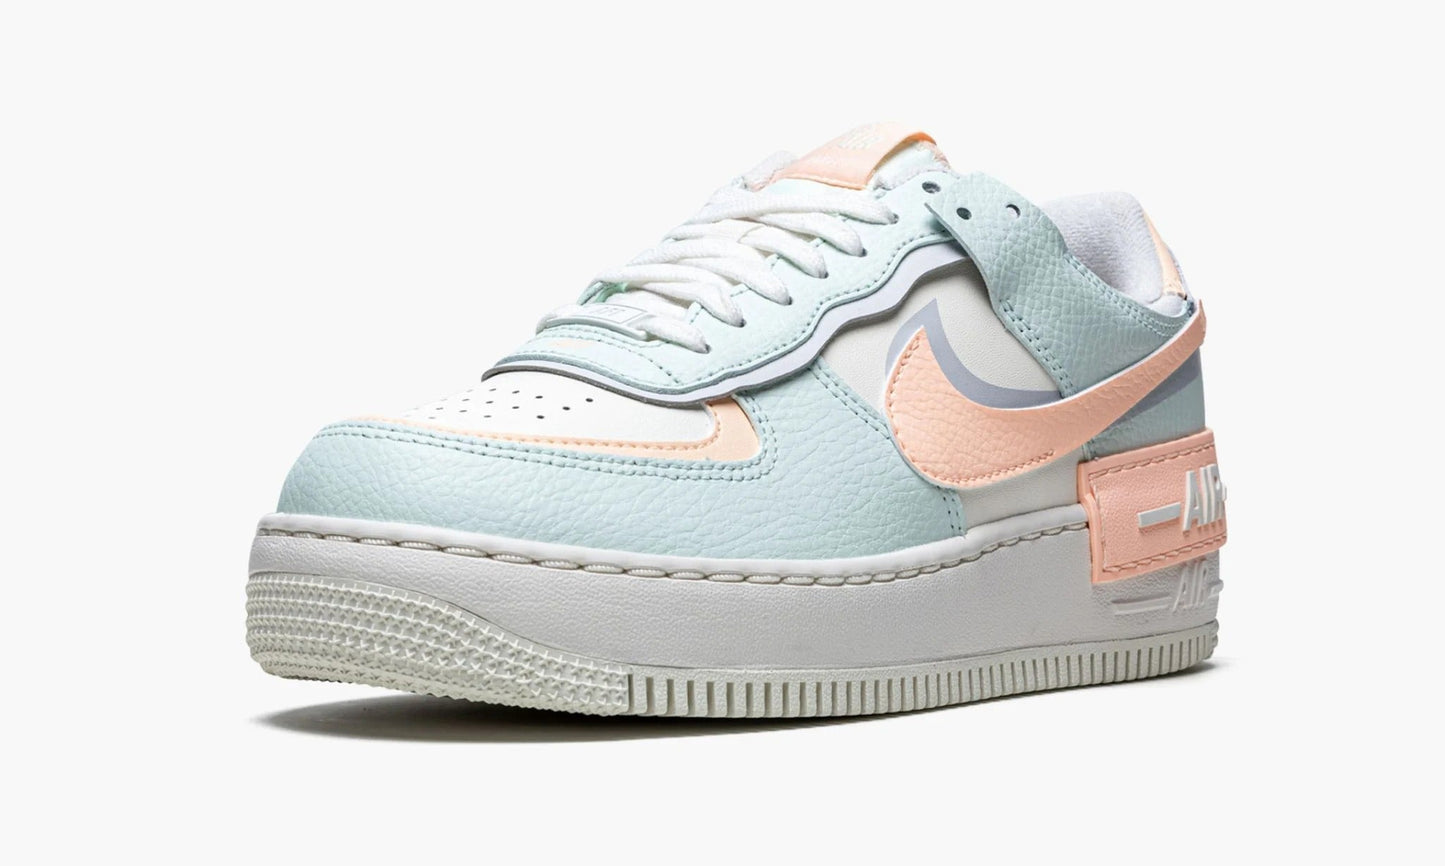 Air Force 1 Low Shadow WMNS “Sail Barely Green” - CU8591 104